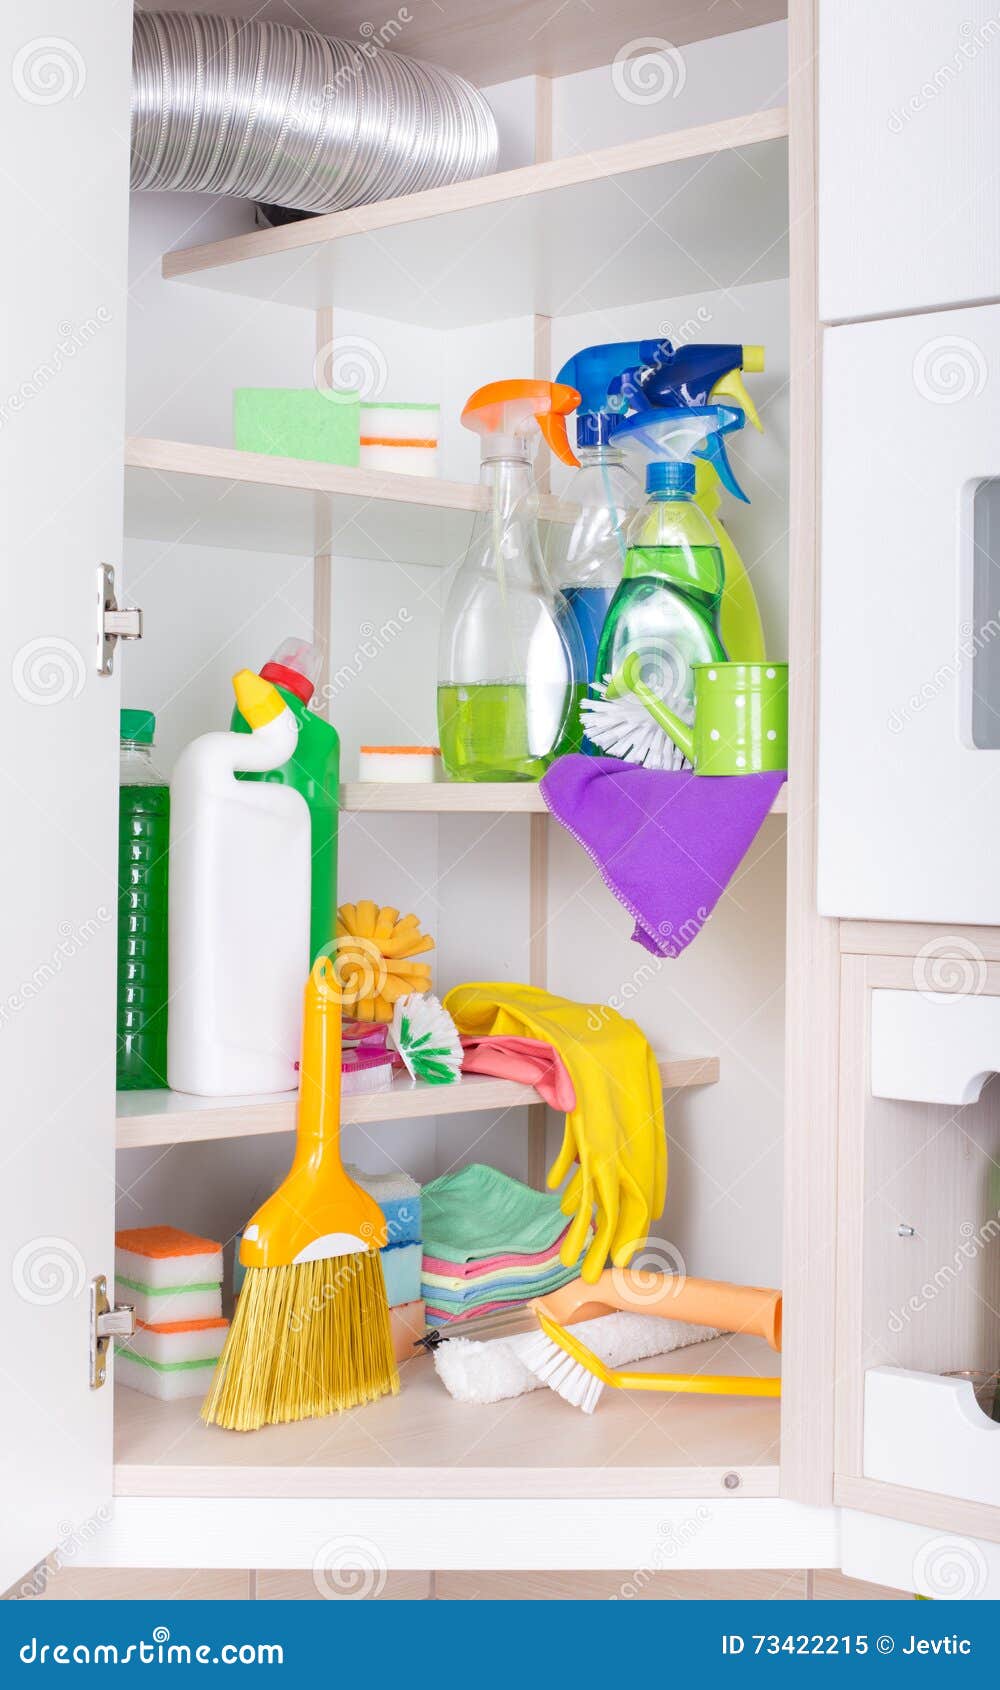 Cleaning supplies storage stock image. Image of housework - 84007503